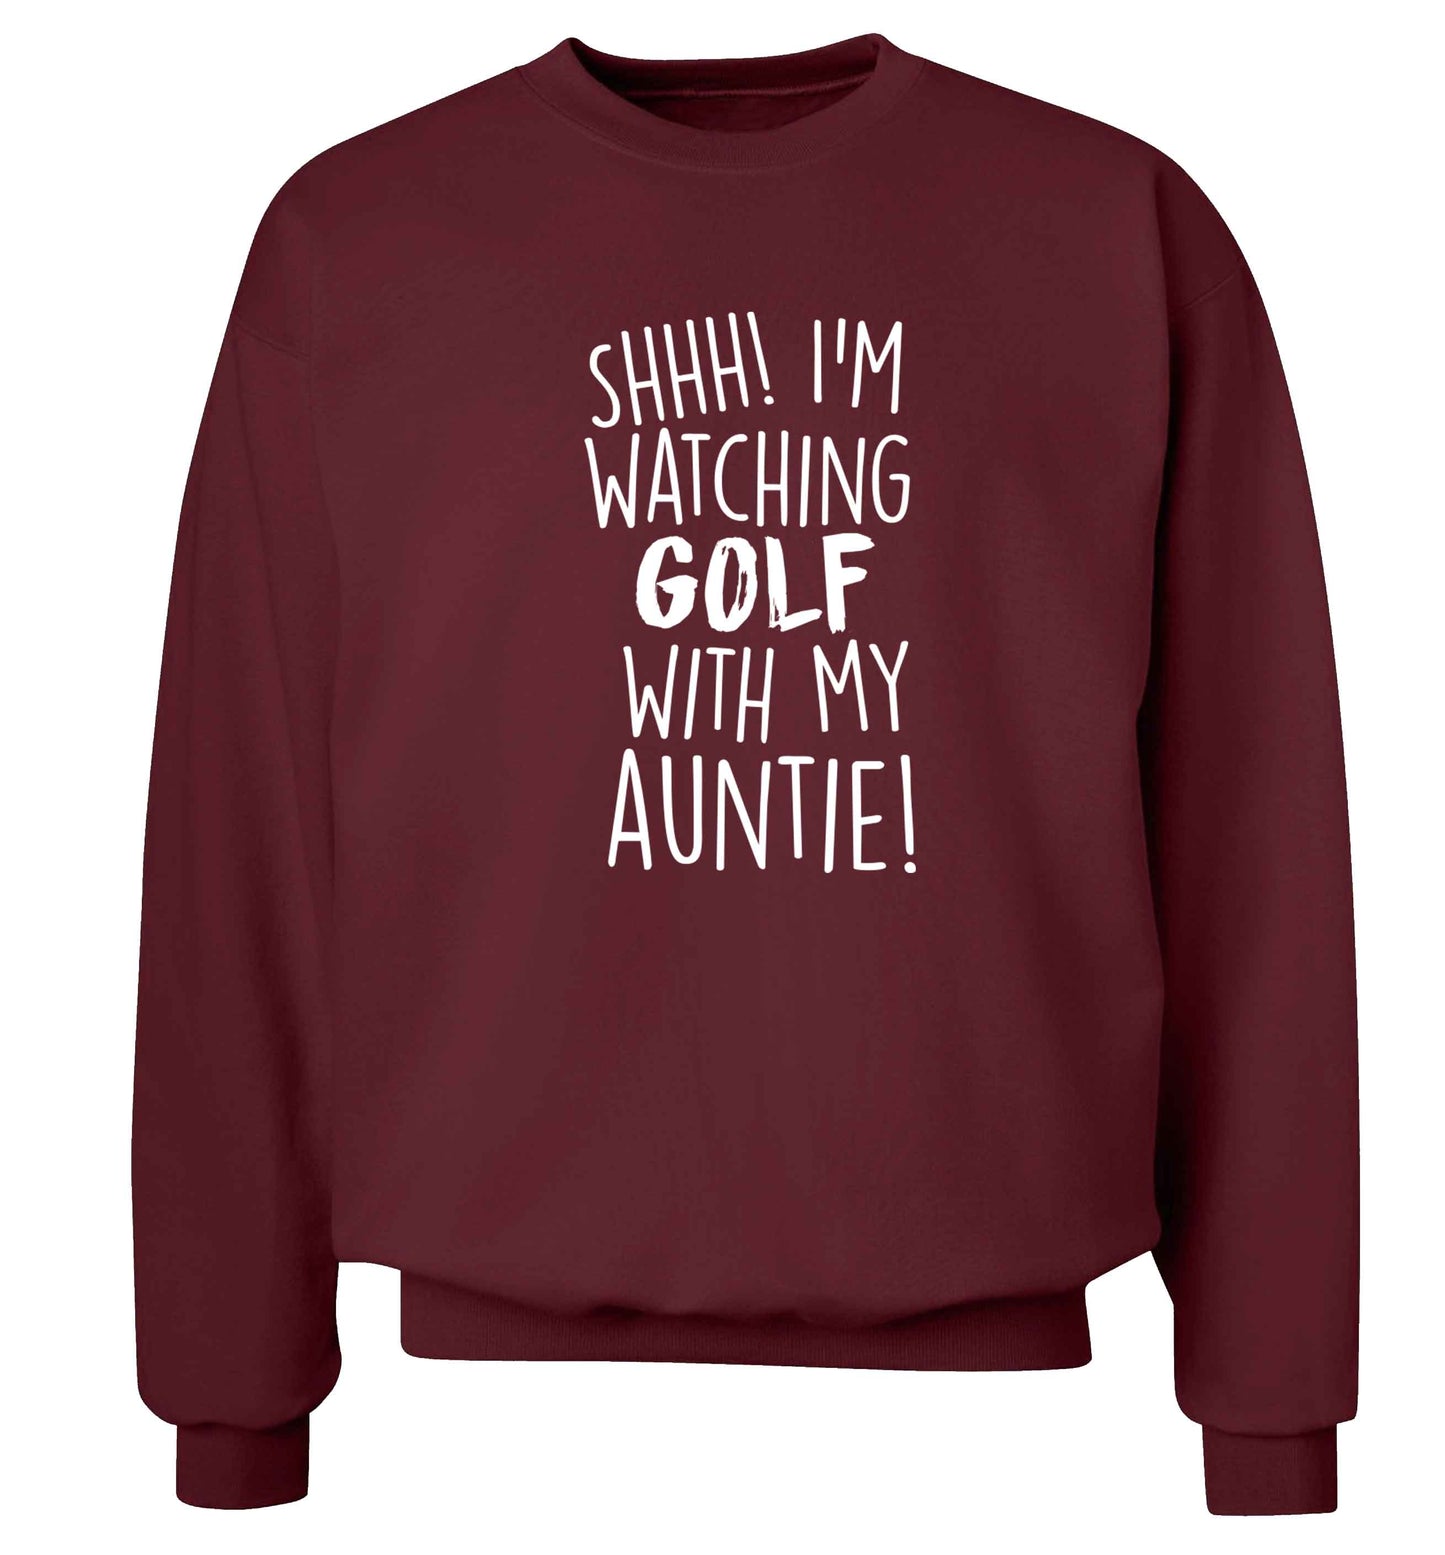 Shh I'm watching golf with my auntie Adult's unisex maroon Sweater 2XL